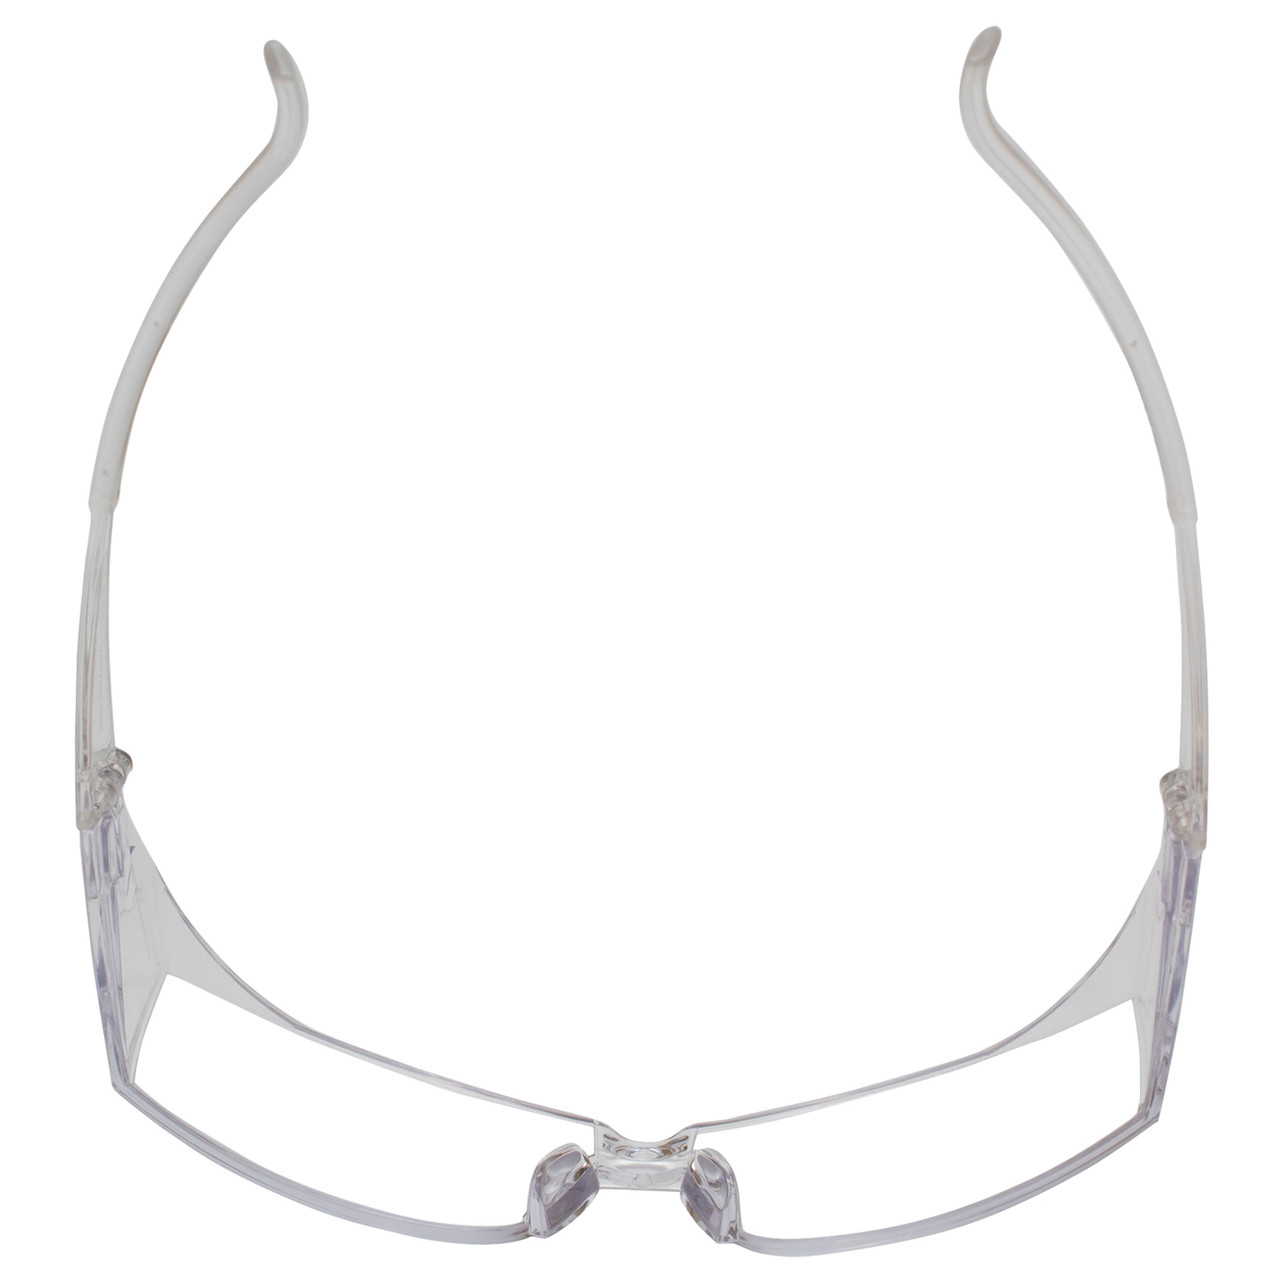 Calabria STS-018CL Clear Safety Glasses Z87.1 Safety Rated